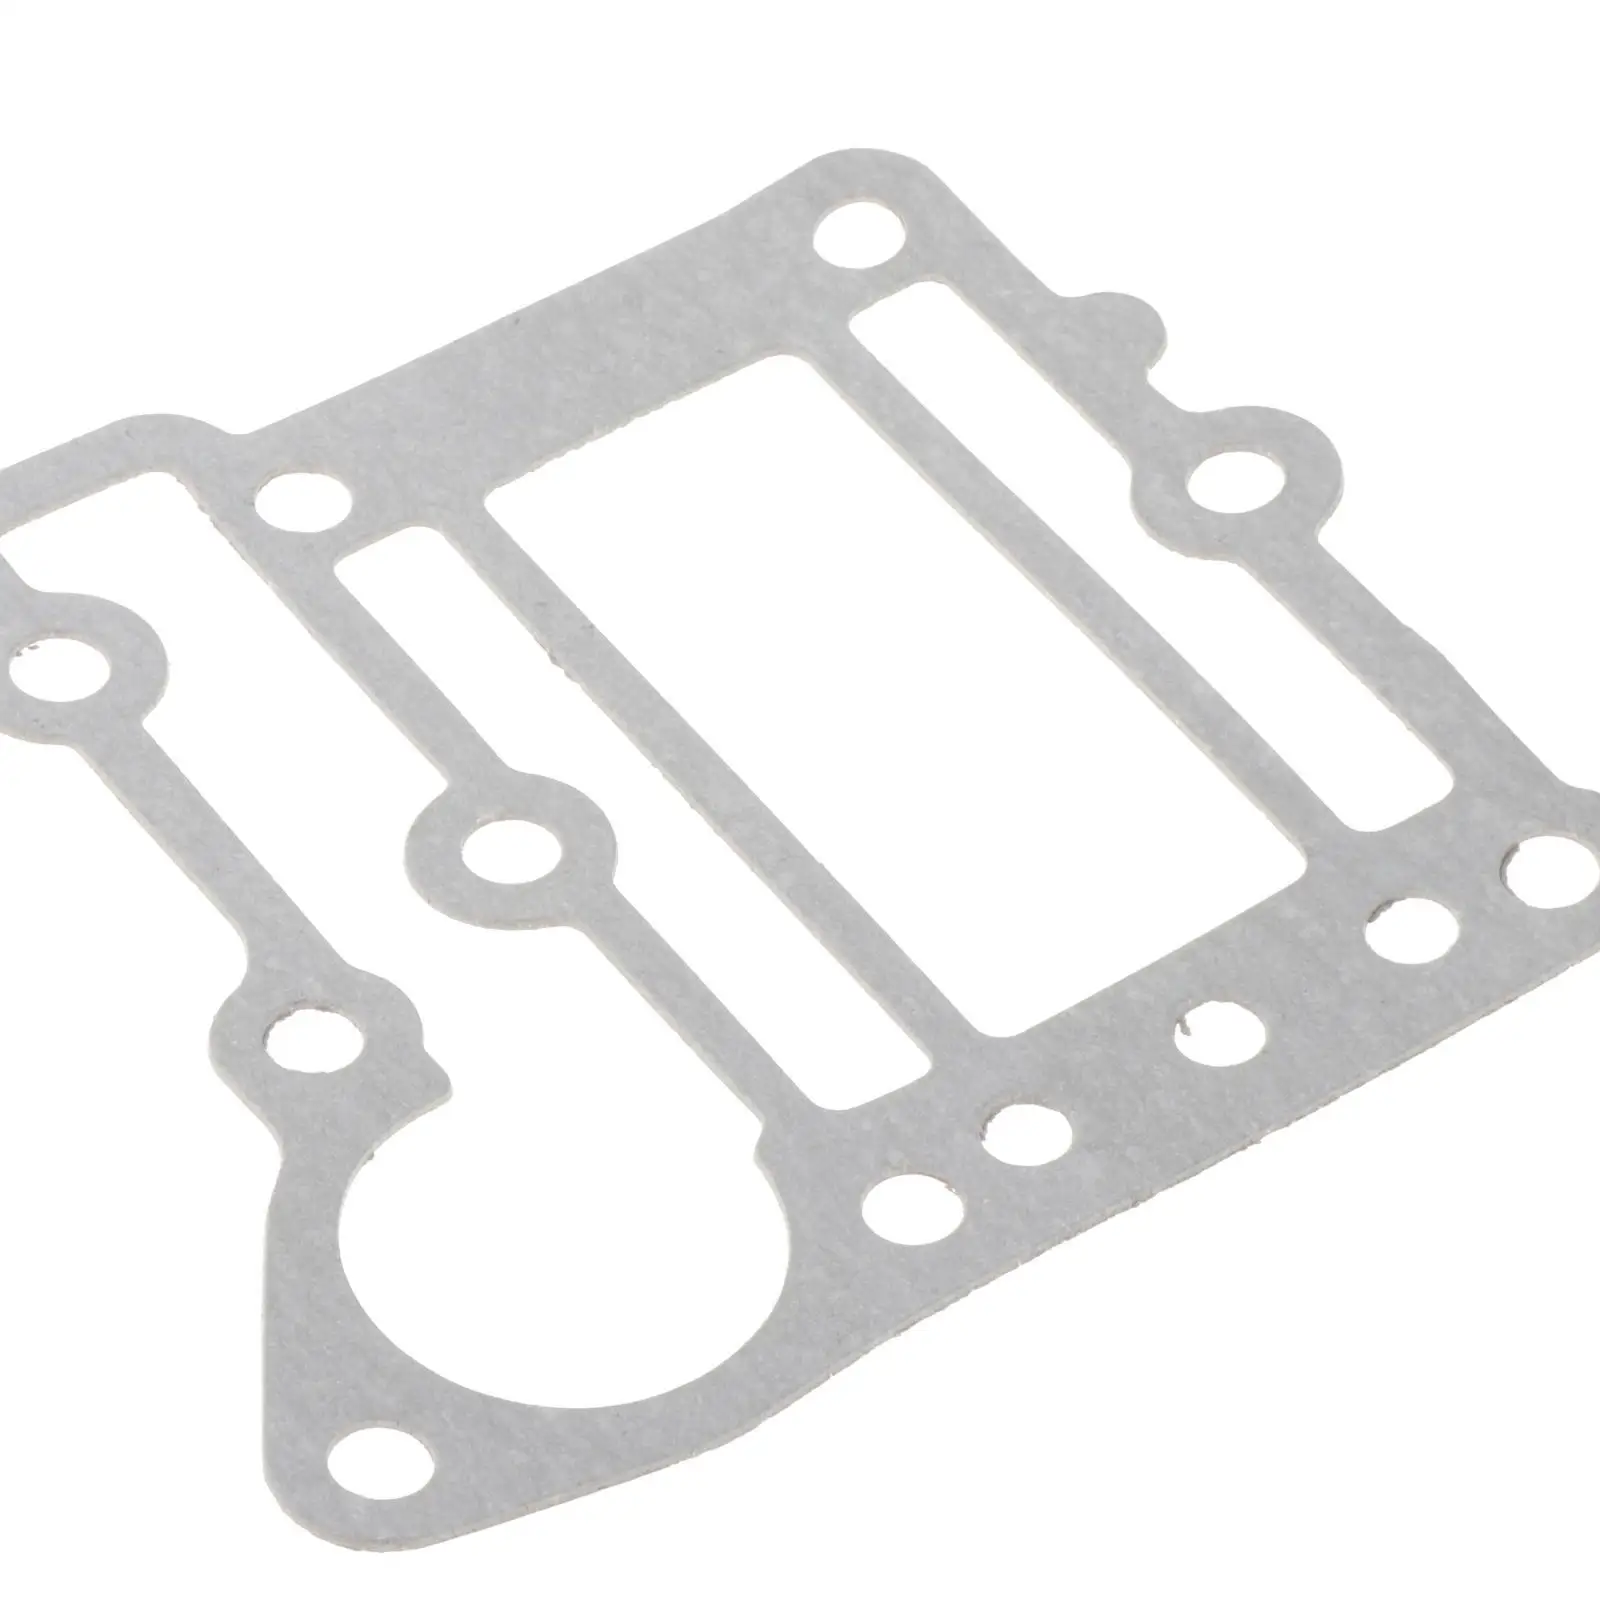 Motorcycle Gasket Outer Cover, Outer Exhaust Gasket, 6E3-41114-A1 Thermostat for Yamaha 5HP Outboard Motor 4B 5C 85